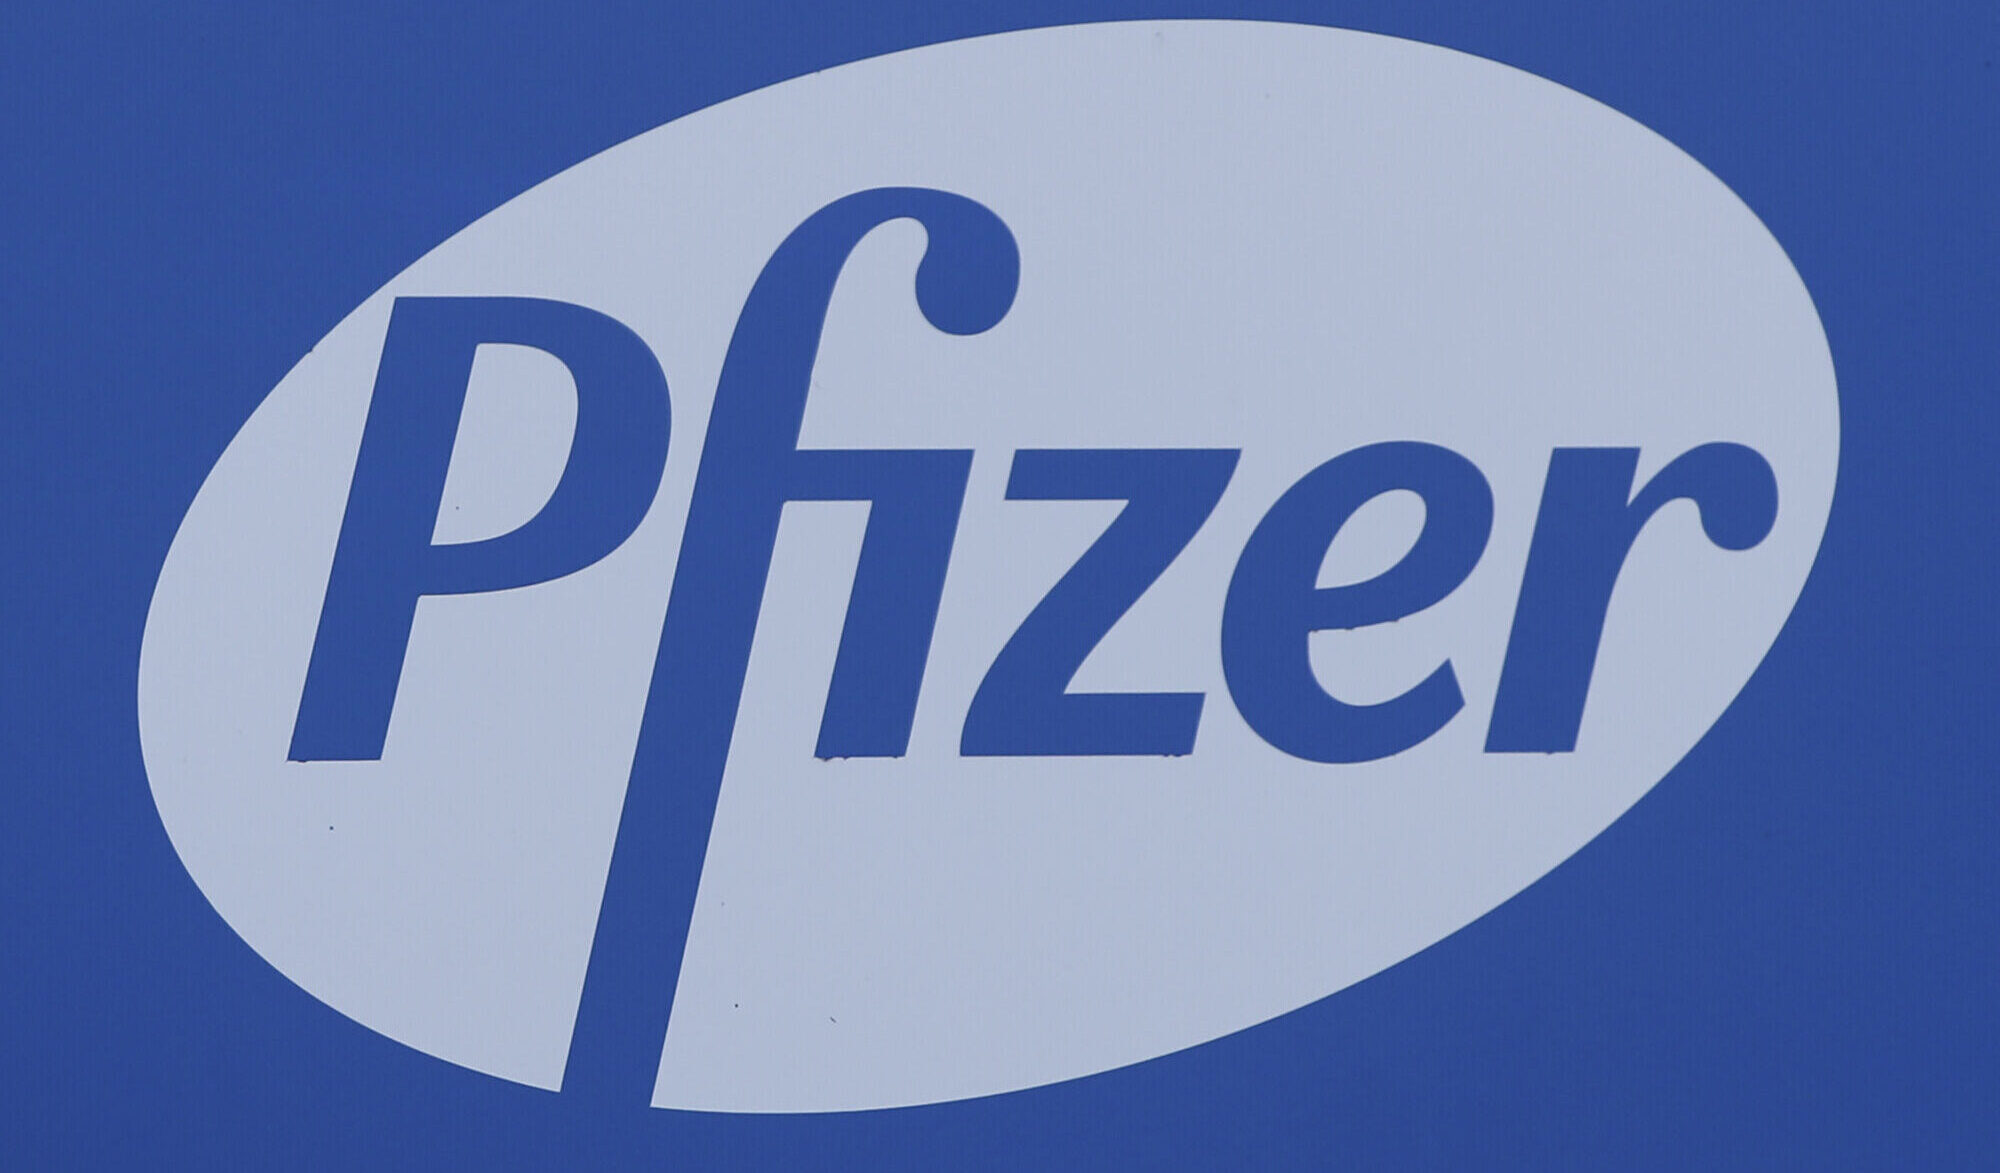 Pfizer and Valneva Announce Clinical Trial of New Lyme Disease Vaccine